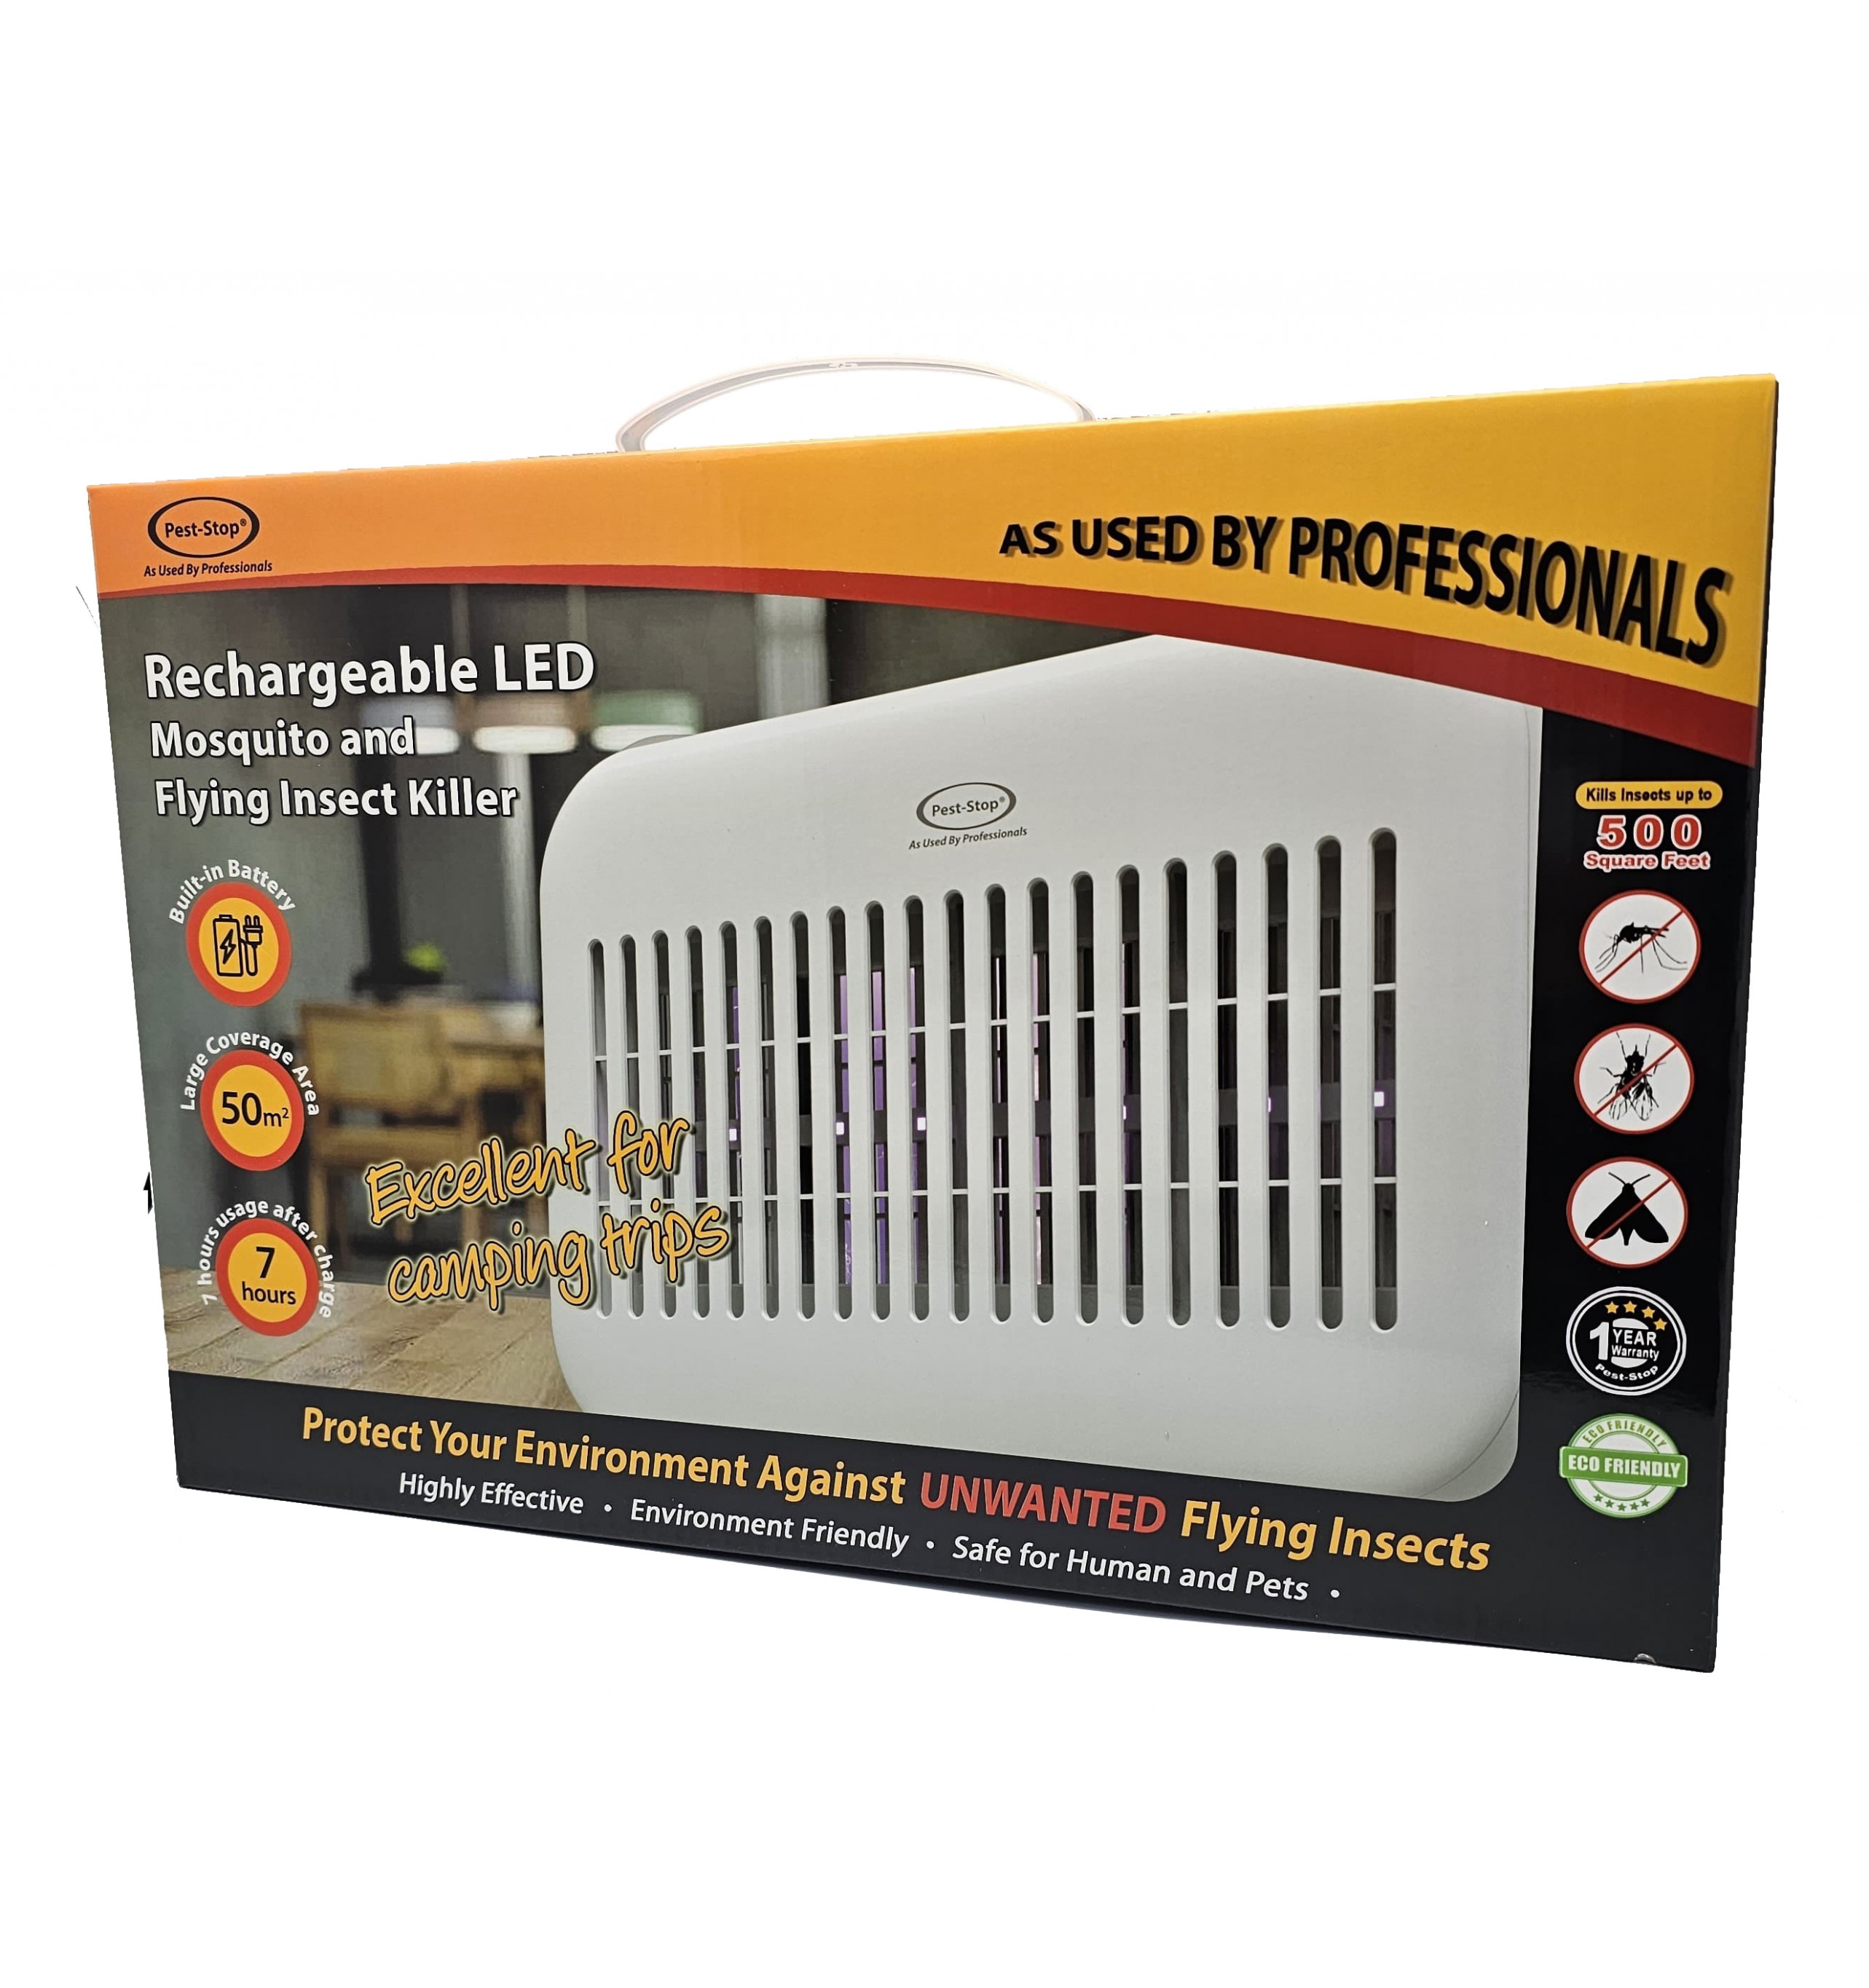 Rechargeable LED Mosquito & Flying Insect Killer